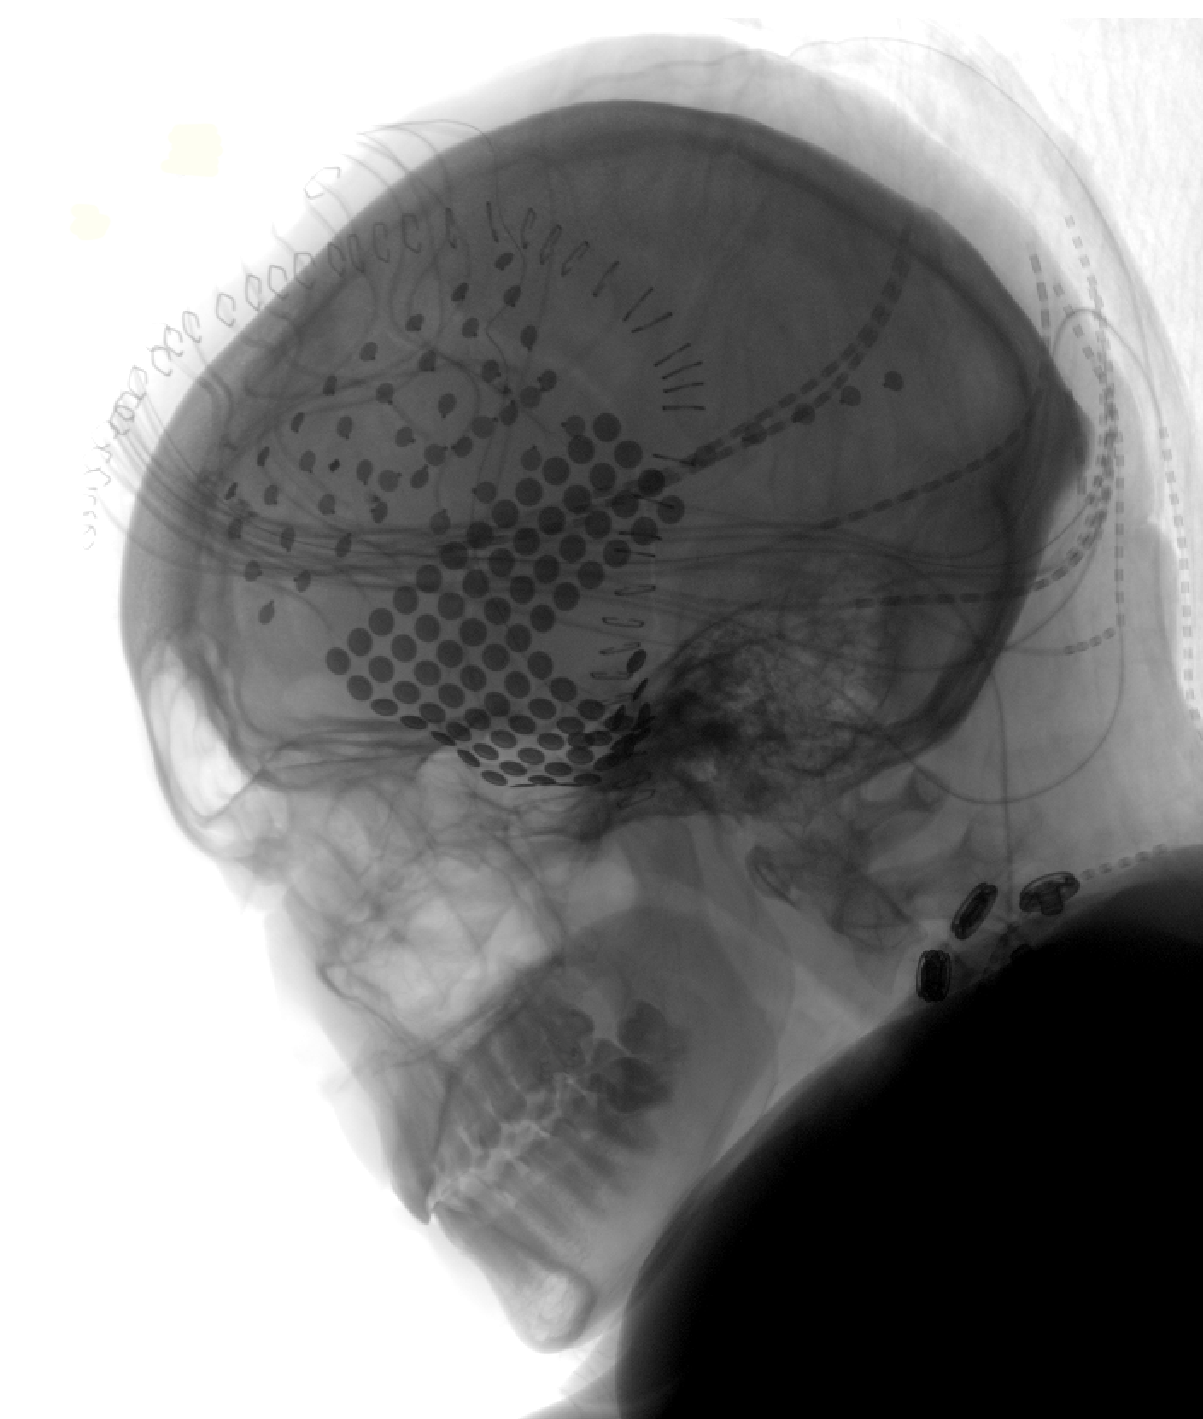 A head X-ray of a participant in the experiment